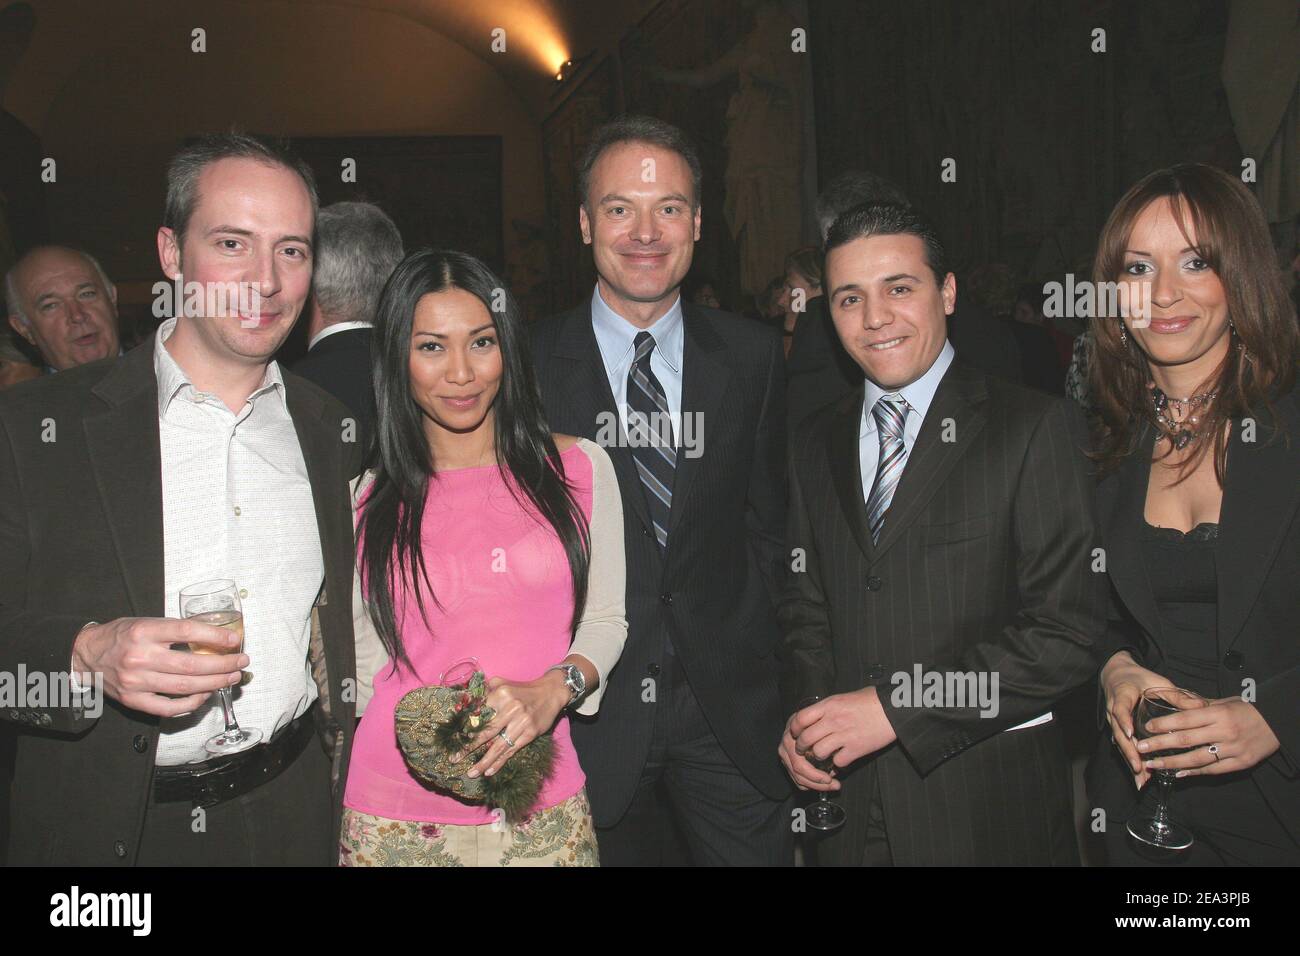 EXCLUSIVE. Indonesian born singer Anggun and her husband Oliver Maury (L), French Minister for Civil Service Renaud Dutreil (C), French rai singer Faudel and his girlfriend Anissa (R) during the 'Reims-Solidarite Tsunami' charity gala for the benefit of the tsunami victims held at the 'Palais du Tau' in Reims, France on April 8, 2005. The event has been initiated by French Minister for Civil Service Renaud Dutreil under the aegis of the UN Programme for Development and co-presided by Jean-Claude Brialy and Satya Oblet. Photo by Benoit Pinguet/ABACA. Stock Photo